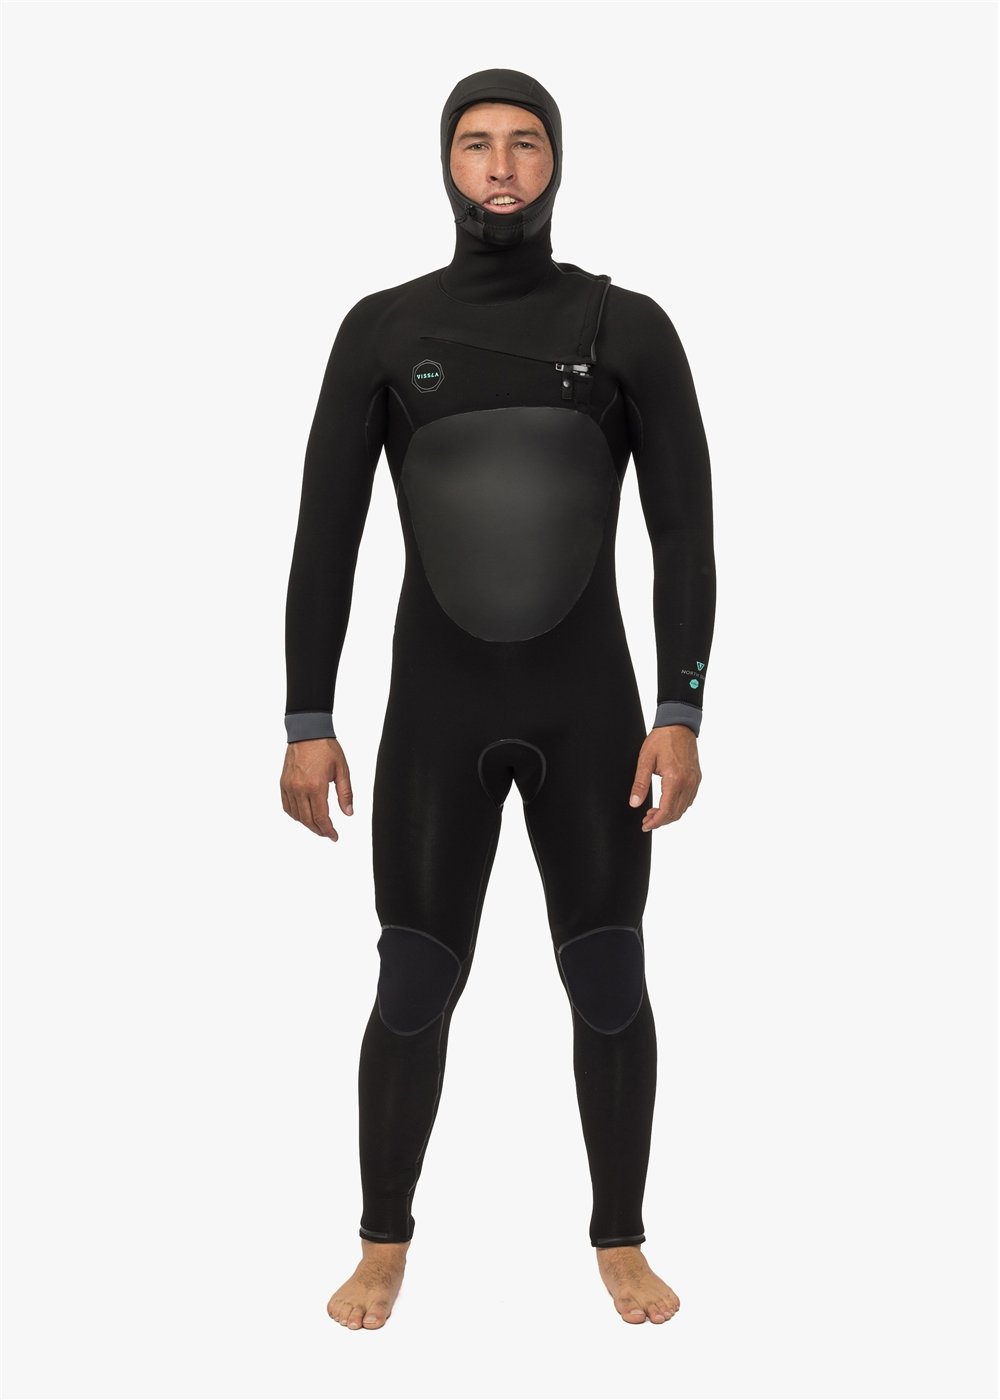 North Seas 5.5-4.5 Full Hooded Chest Zip Wetsuit